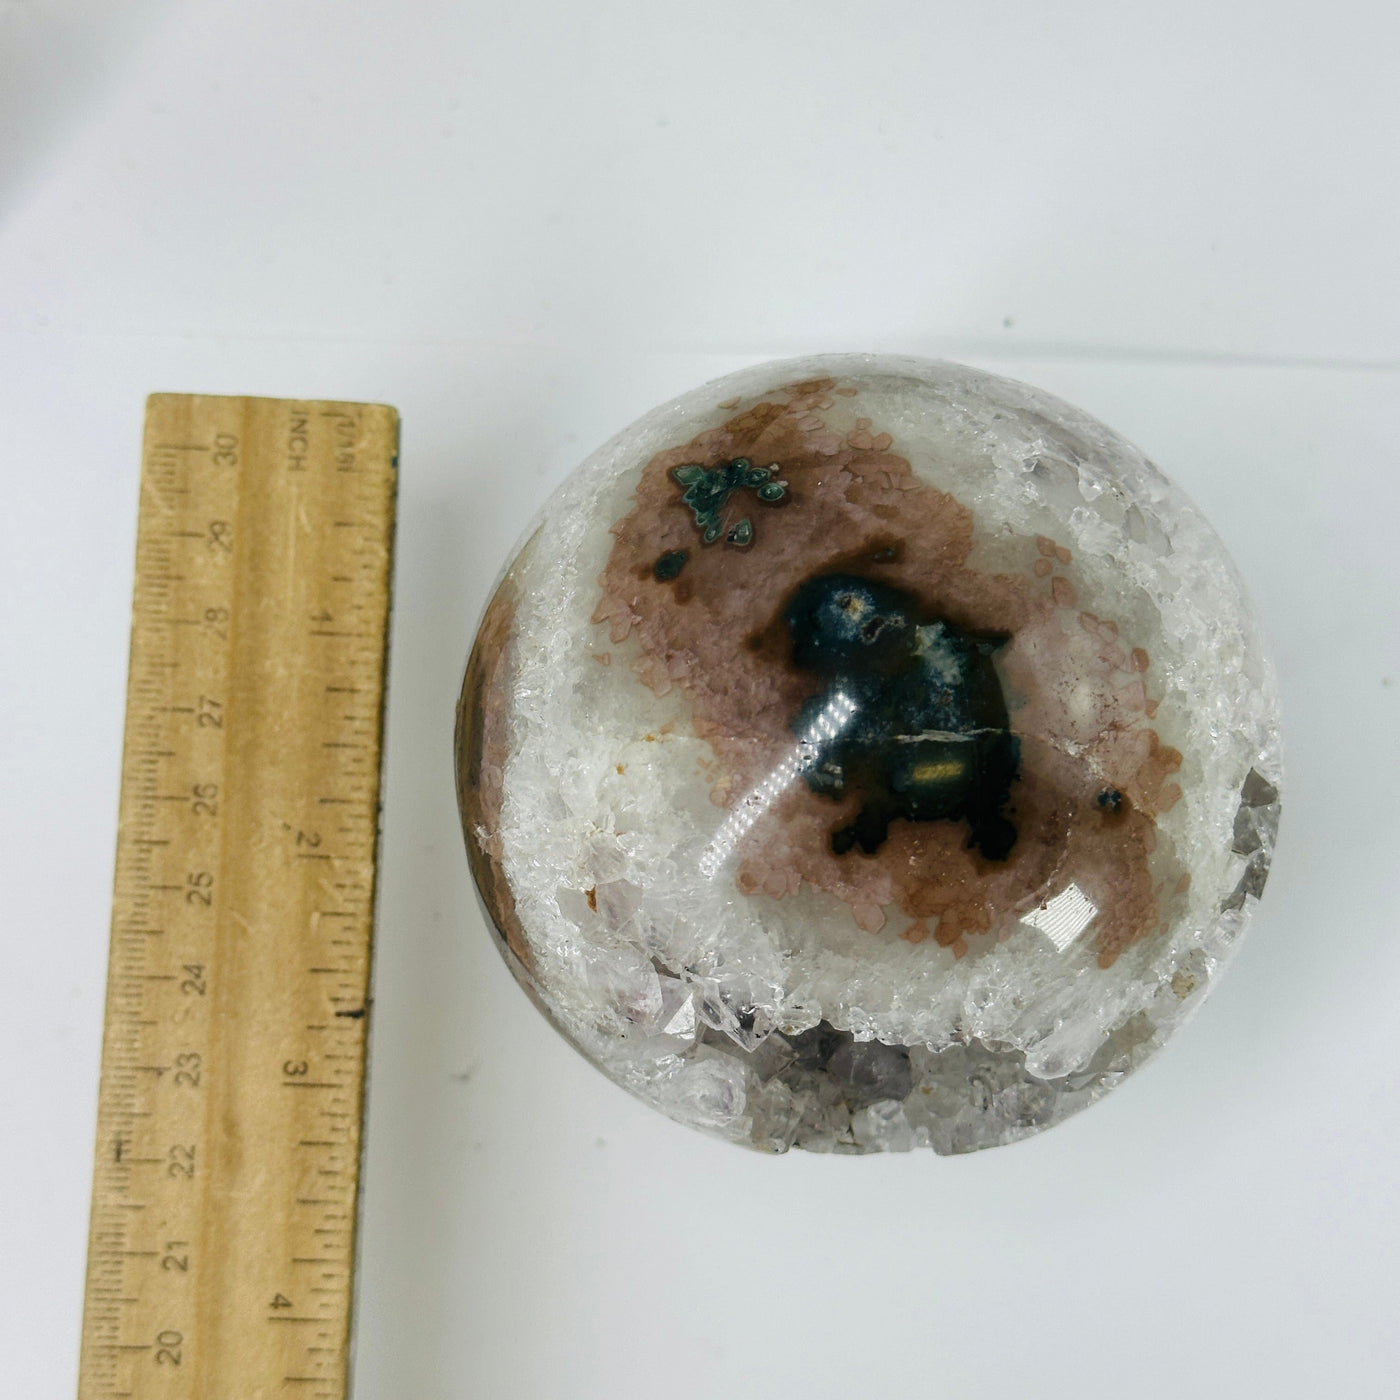 amethyst sphere next to a ruler for size reference